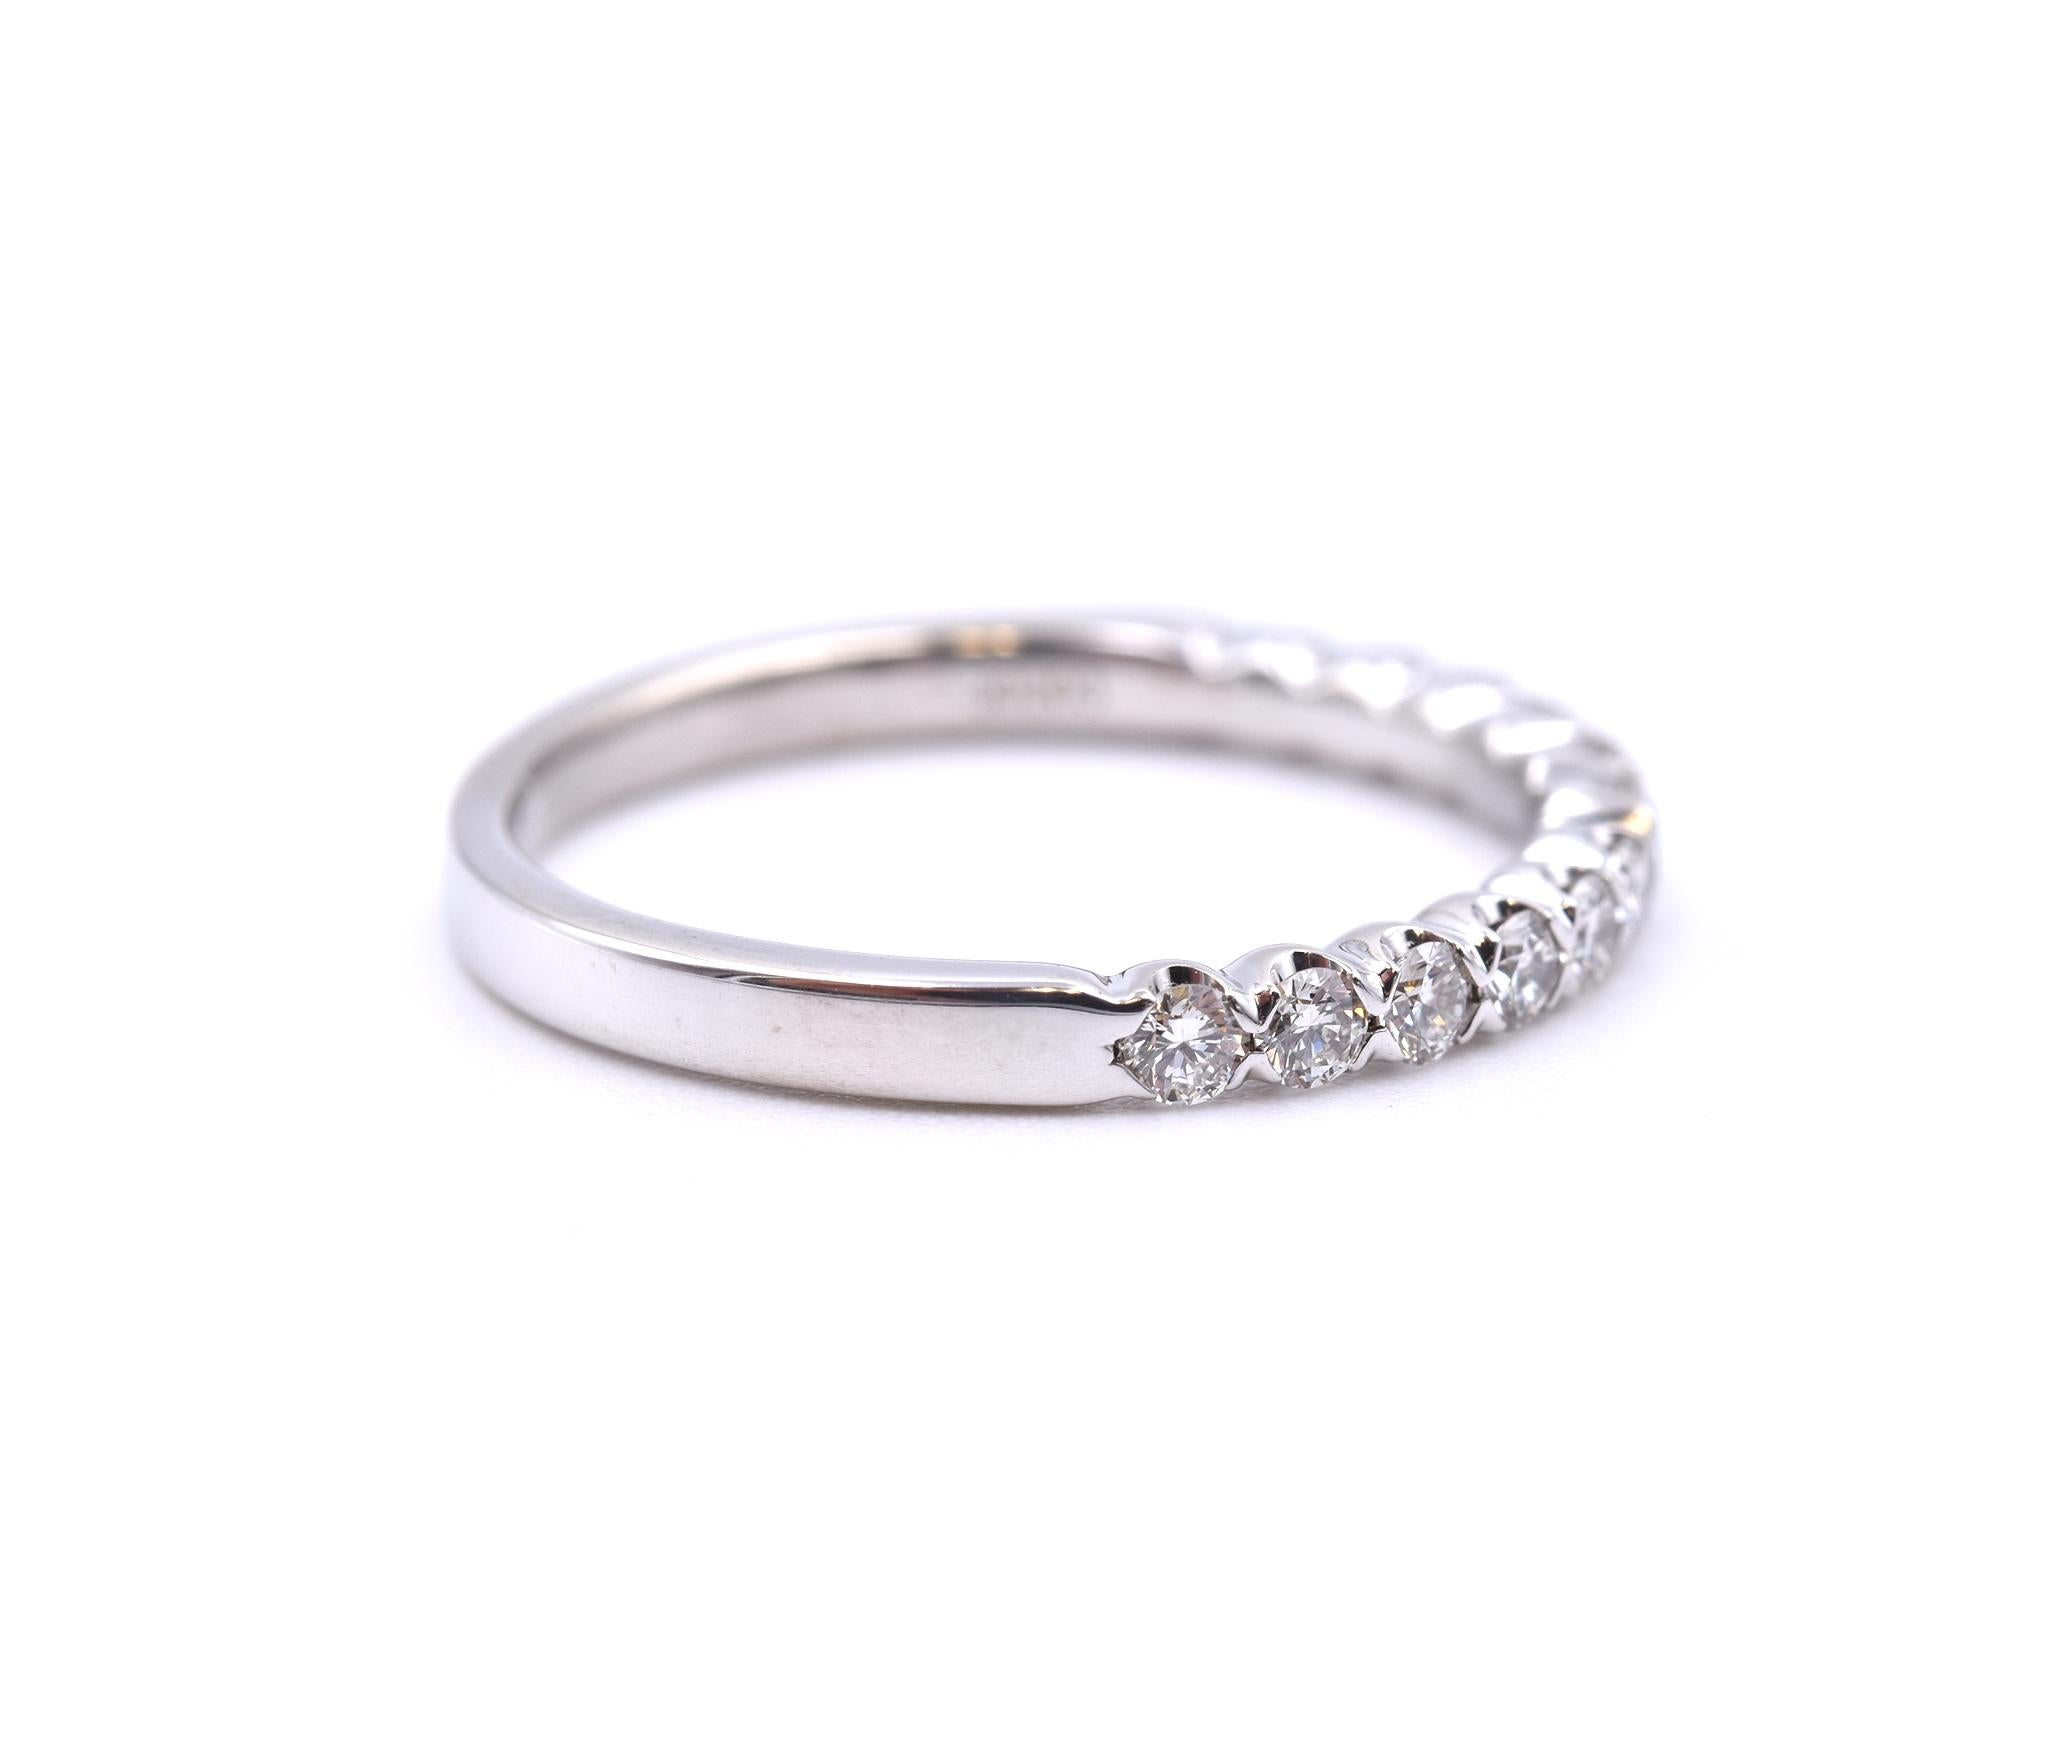 Material: 14K white gold 
Diamonds: 12 round brilliant cut = .42cttw
Color: G
Clarity: VS2
Ring Size: 6 (please allow up to 2 additional business days for sizing requests)
Dimensions: ring measures 2.1mm wide
Weight: 1.90 grams
